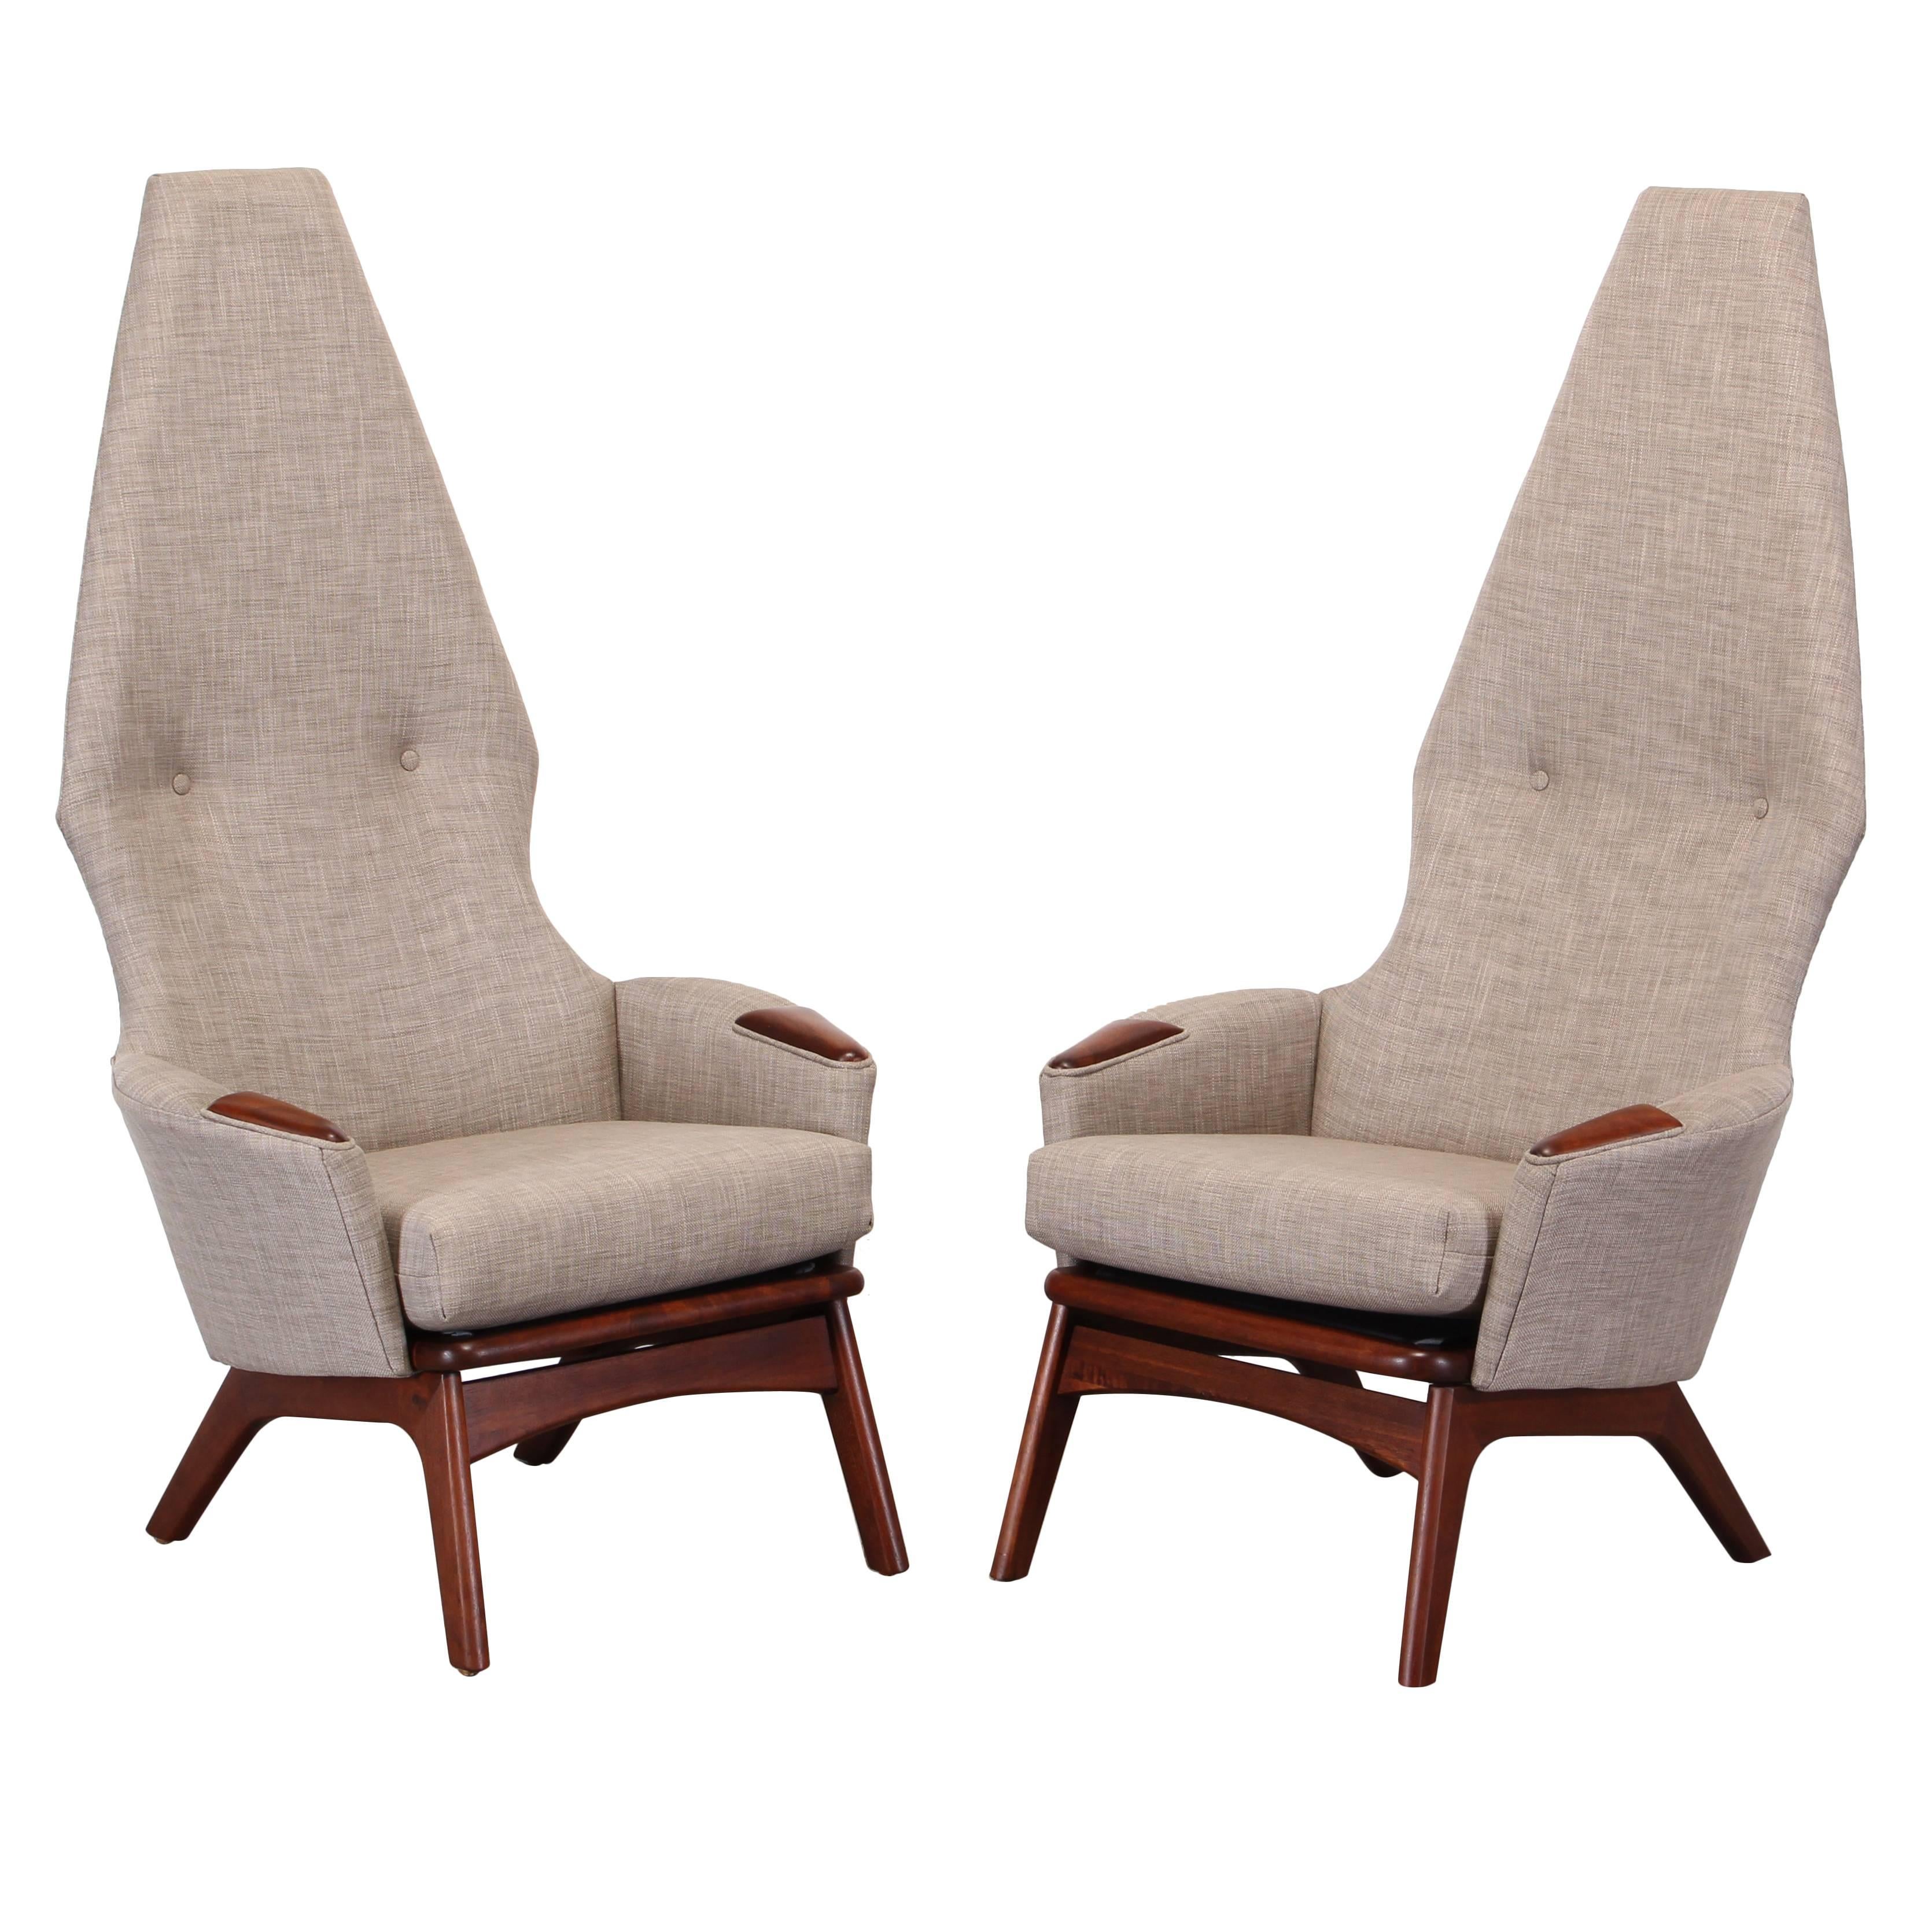 Adrian Pearsall Pair of Walnut Chairs for Craft Associates Model #2056-C, 1960